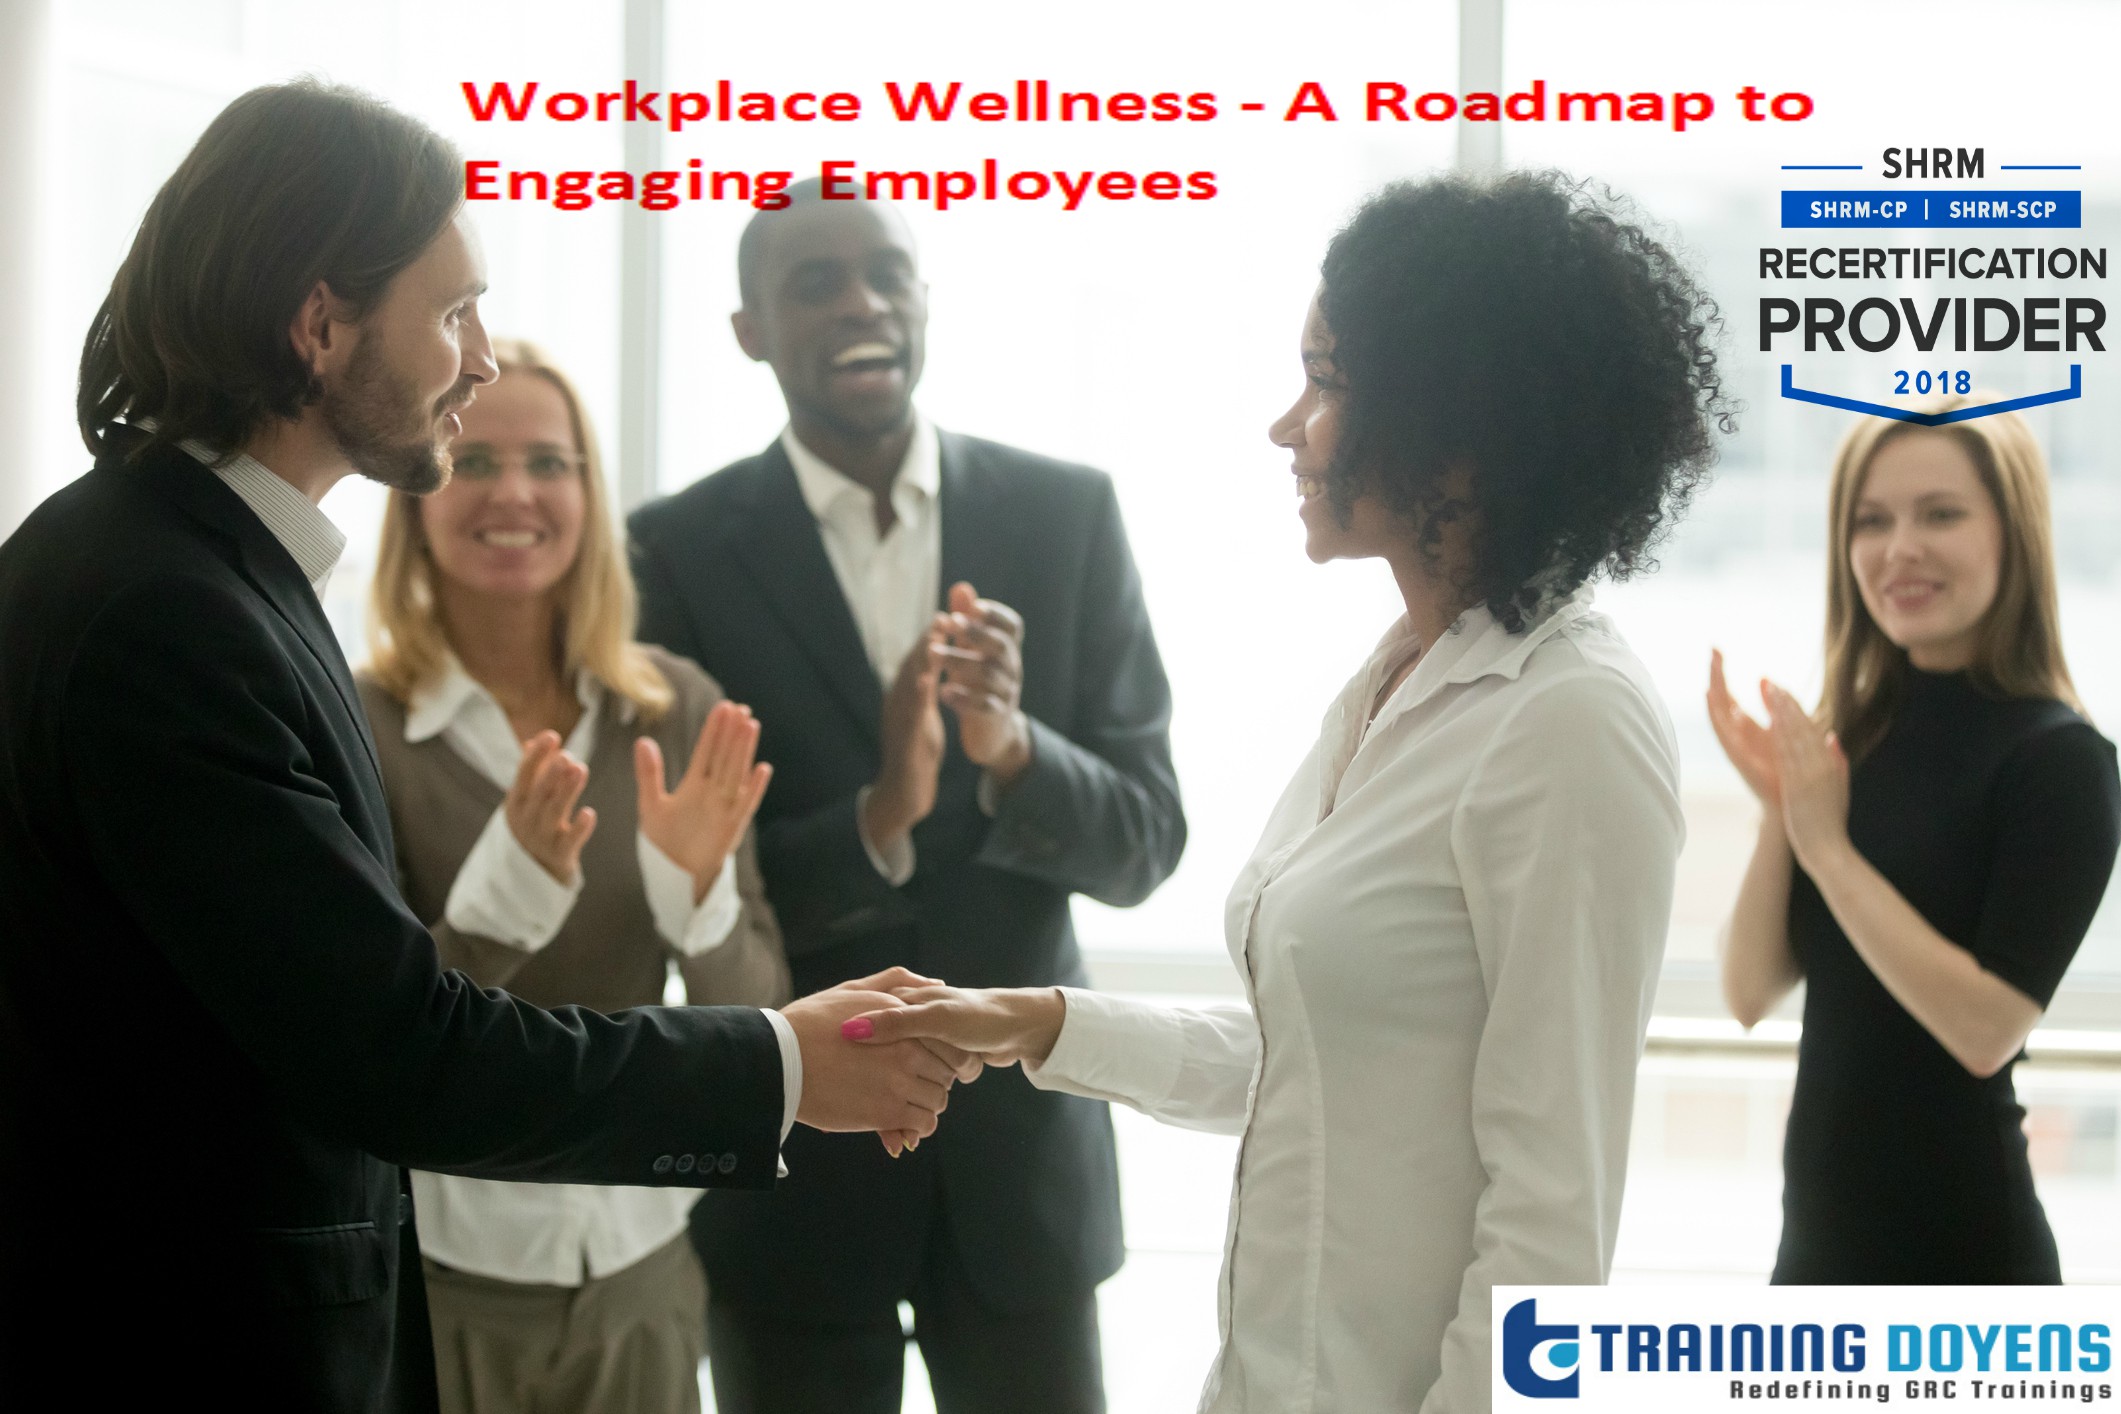 Workplace Wellness - A Roadmap to Engaging Employees, Aurora, Colorado, United States